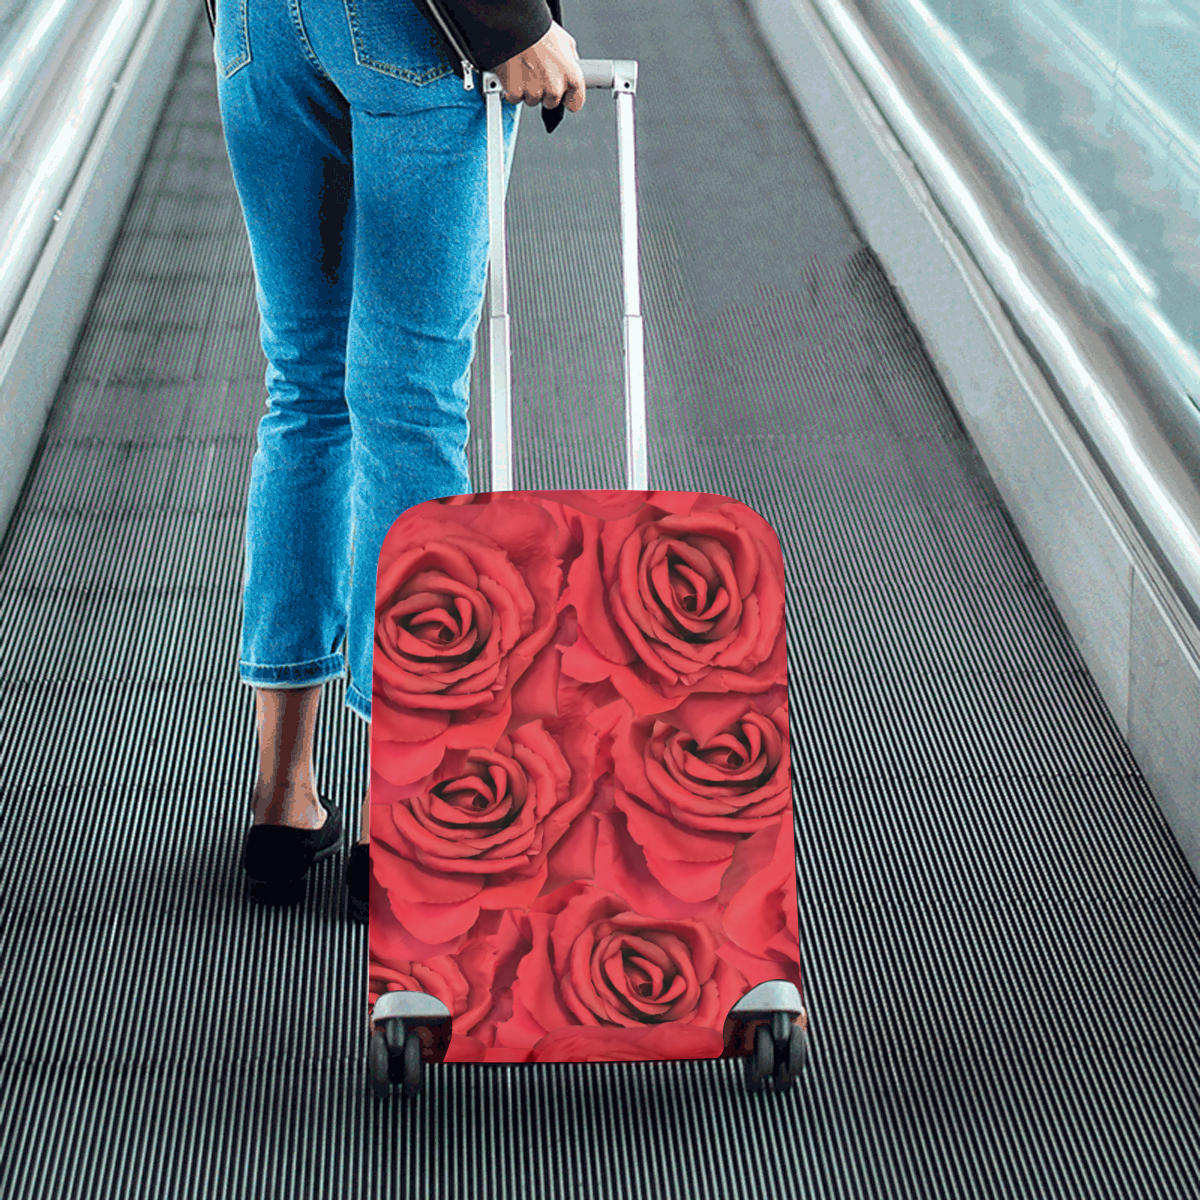 Radical Red Roses Luggage Cover/Small 18"-21"